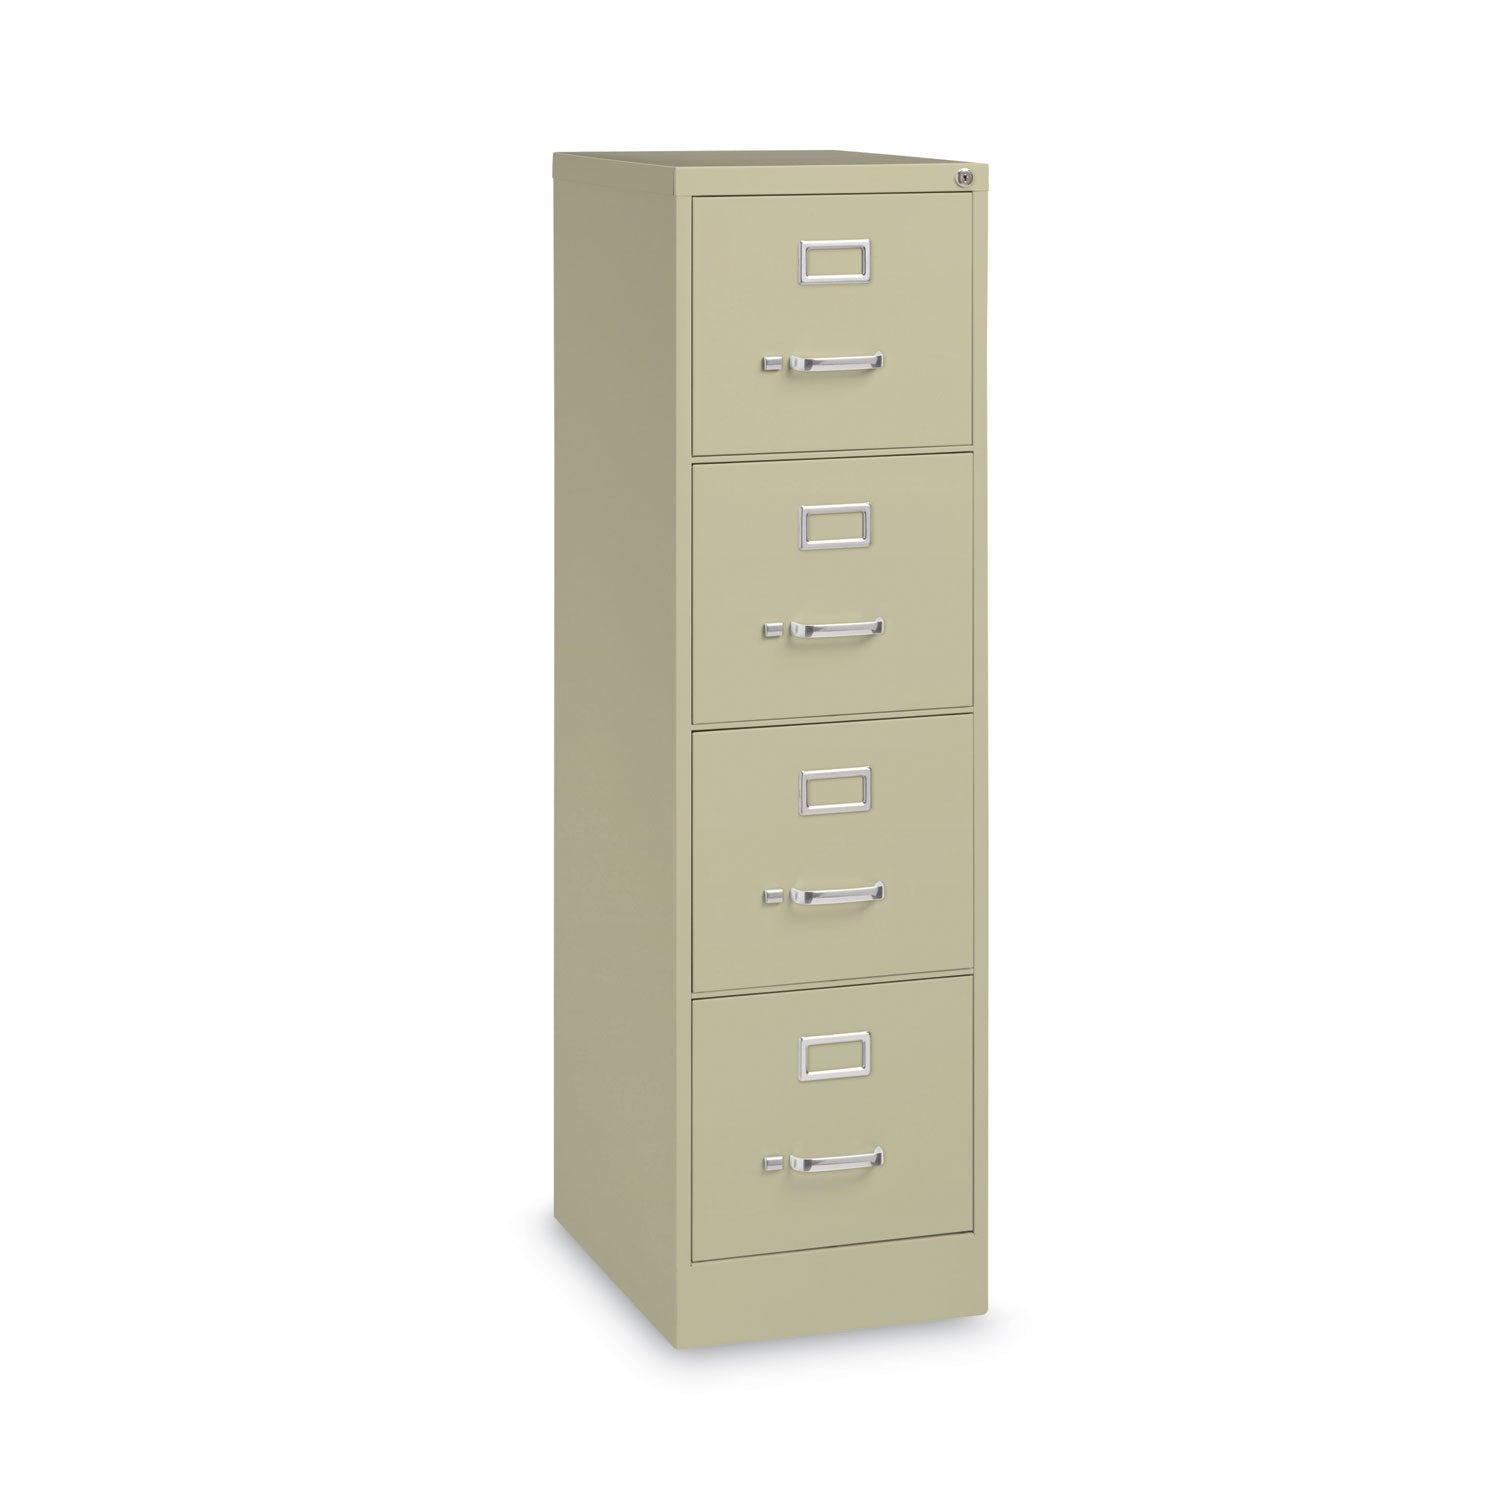 vertical-letter-file-cabinet-4-letter-size-file-drawers-putty-15-x-22-x-52_hid17891 - 3